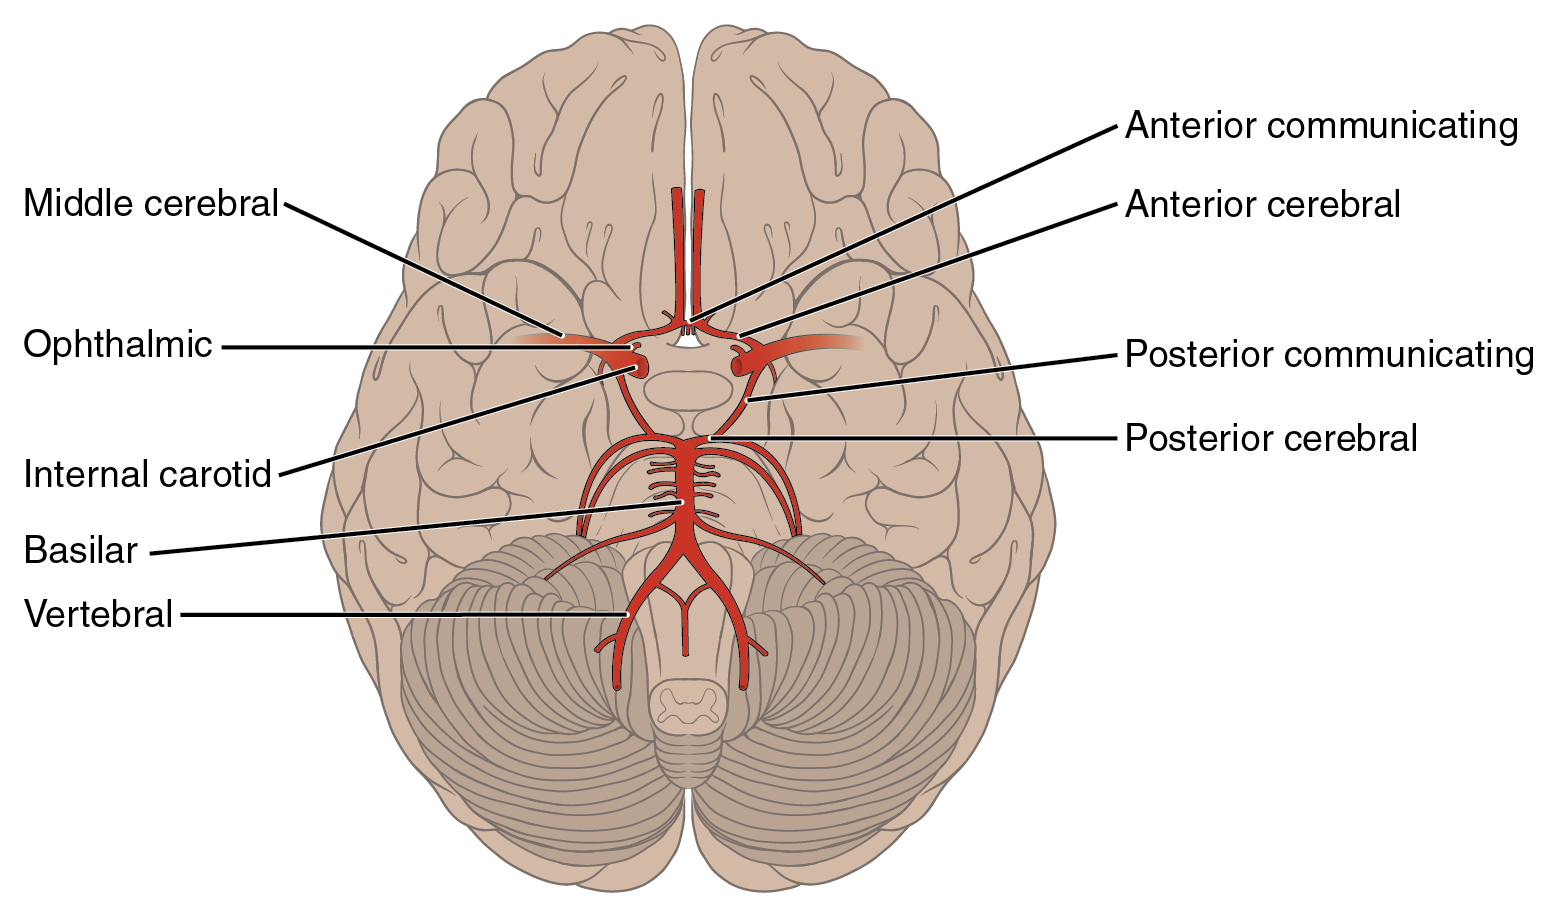 Circular structure on the inferior side of the brain formed by the branches of multiple arteries. 